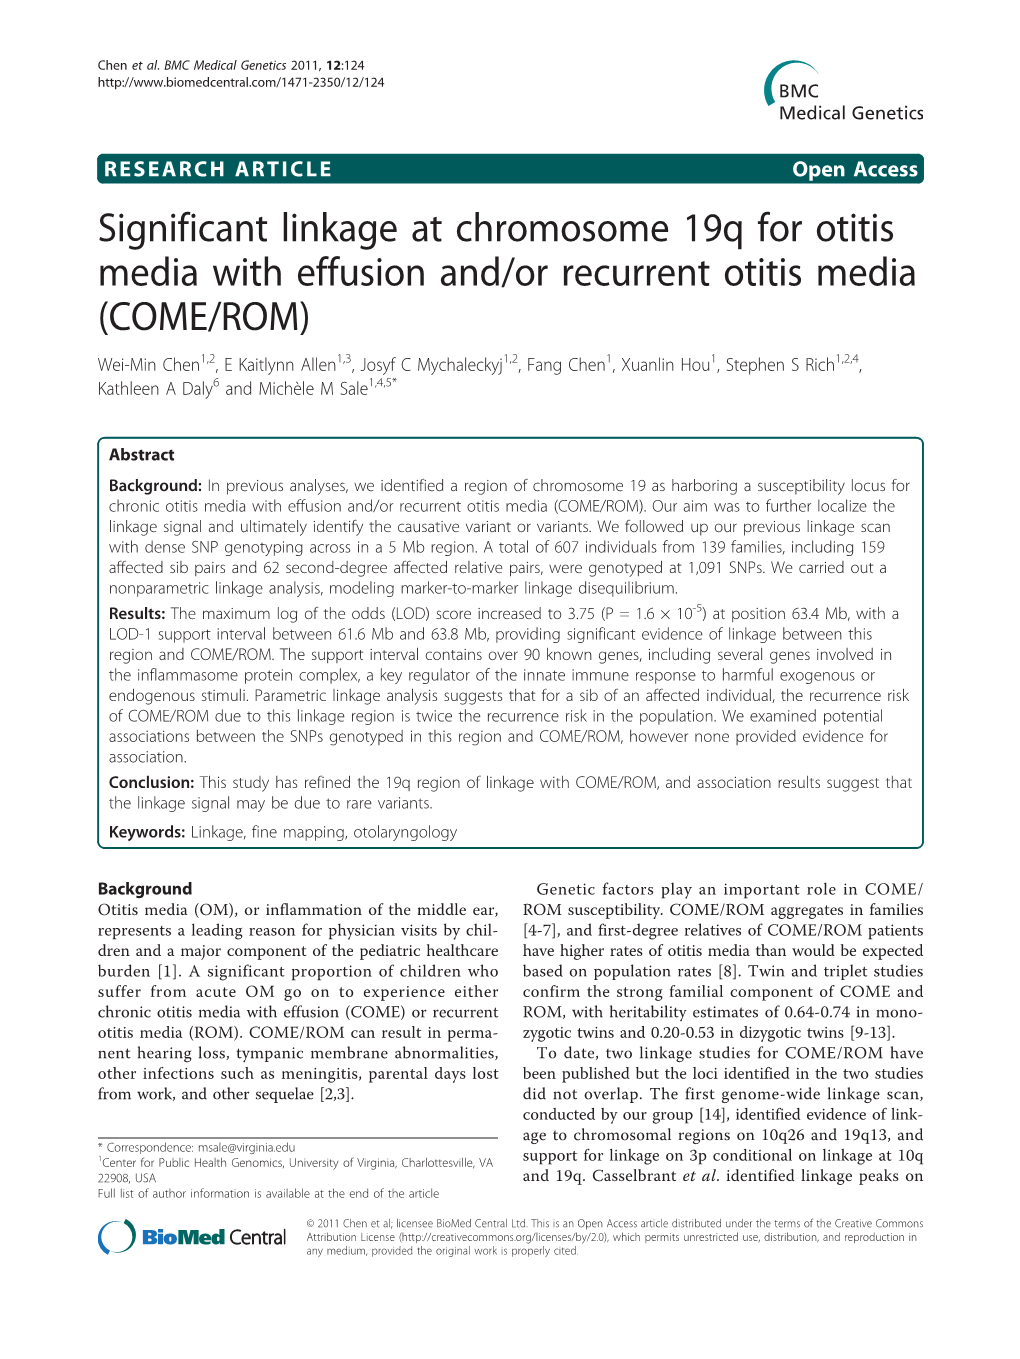 Significant Linkage at Chromosome 19Q for Otitis Media with Effusion